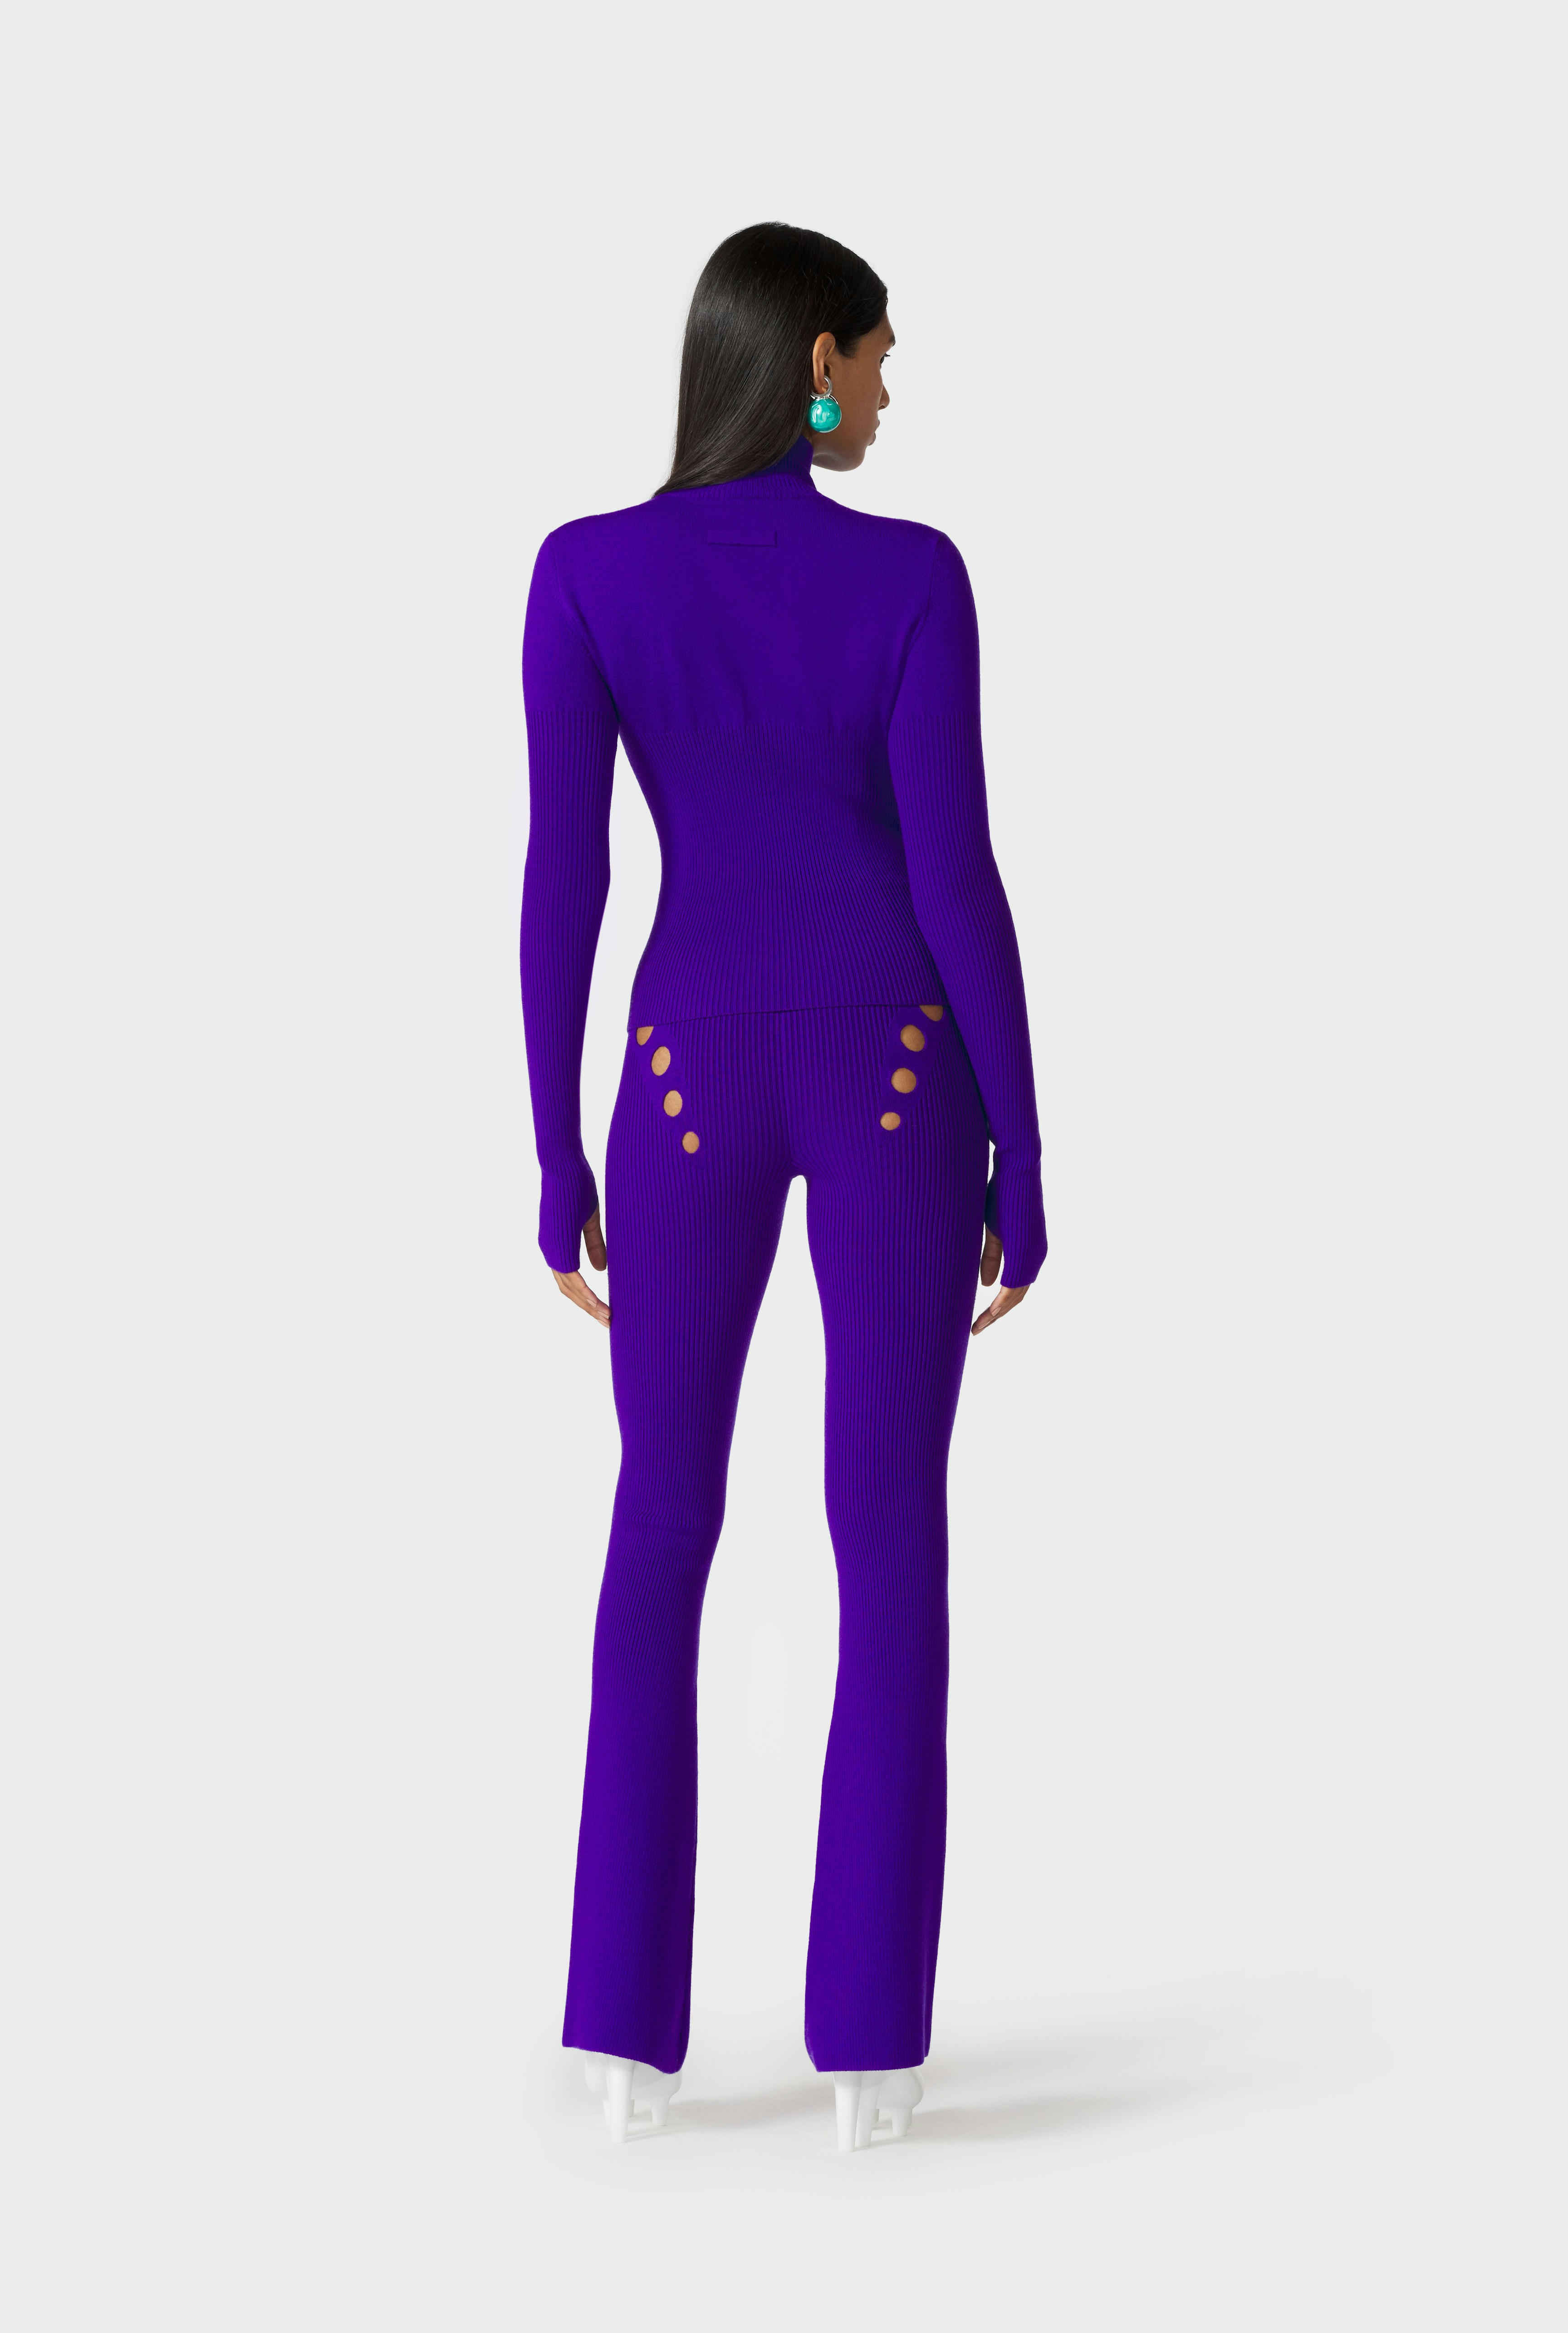 The Purple Openworked Knit Pants